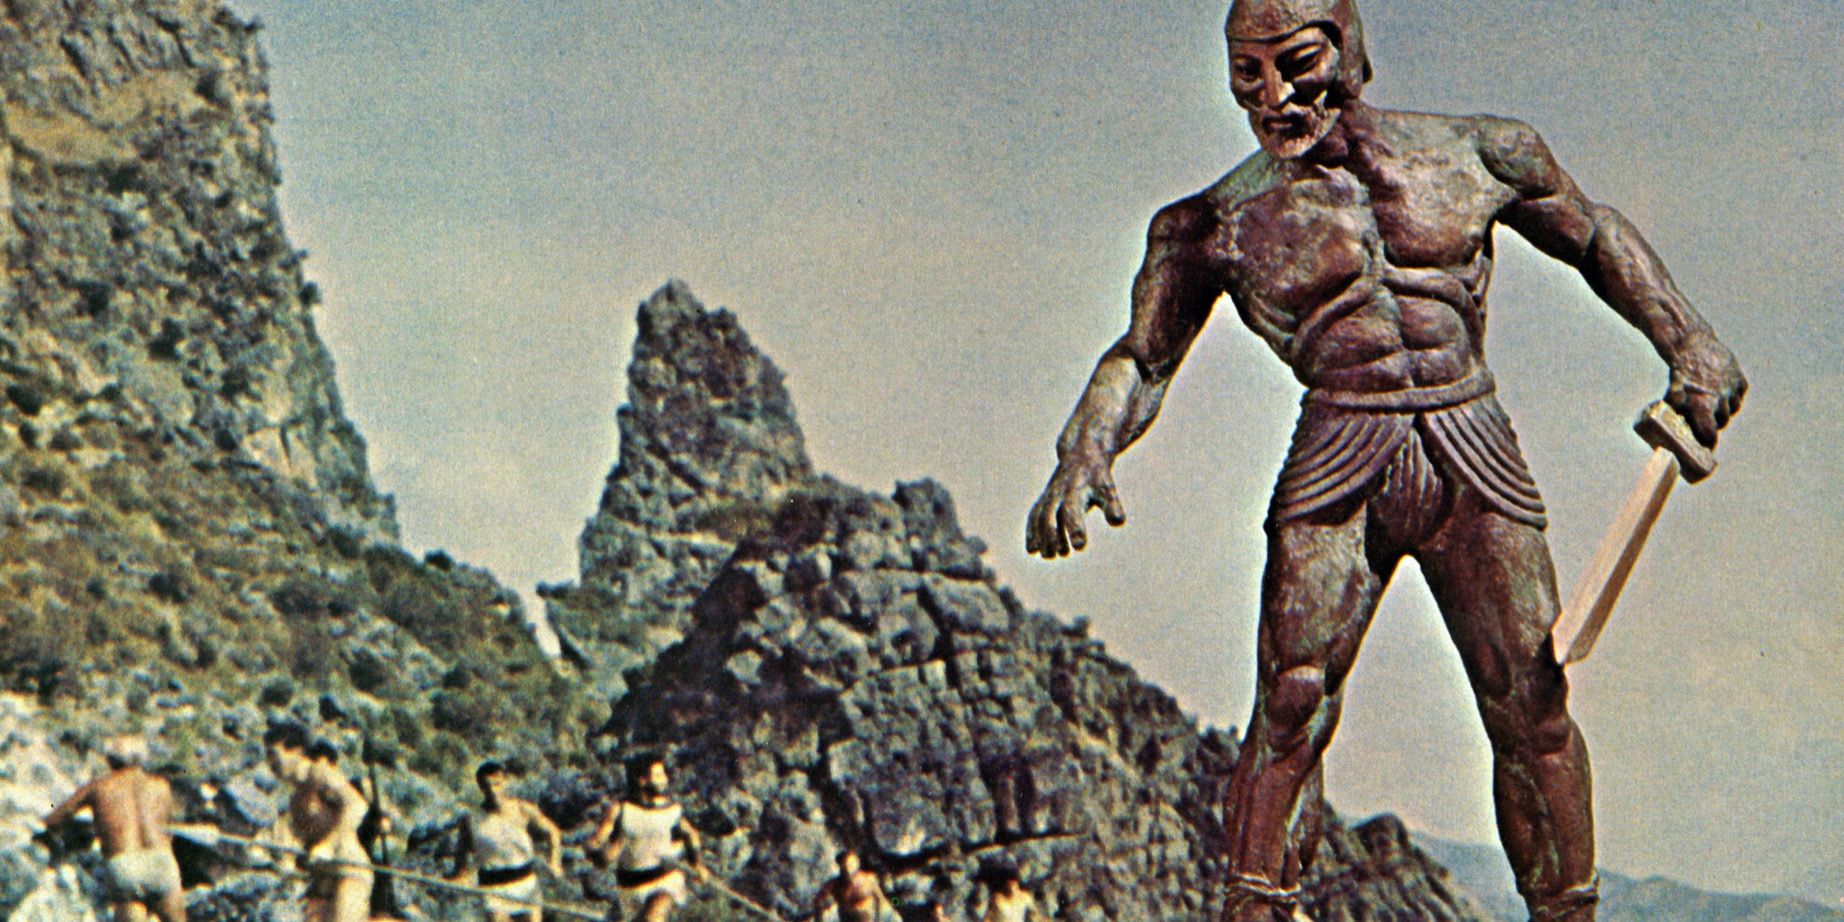 An image from Jason and the Argonauts.